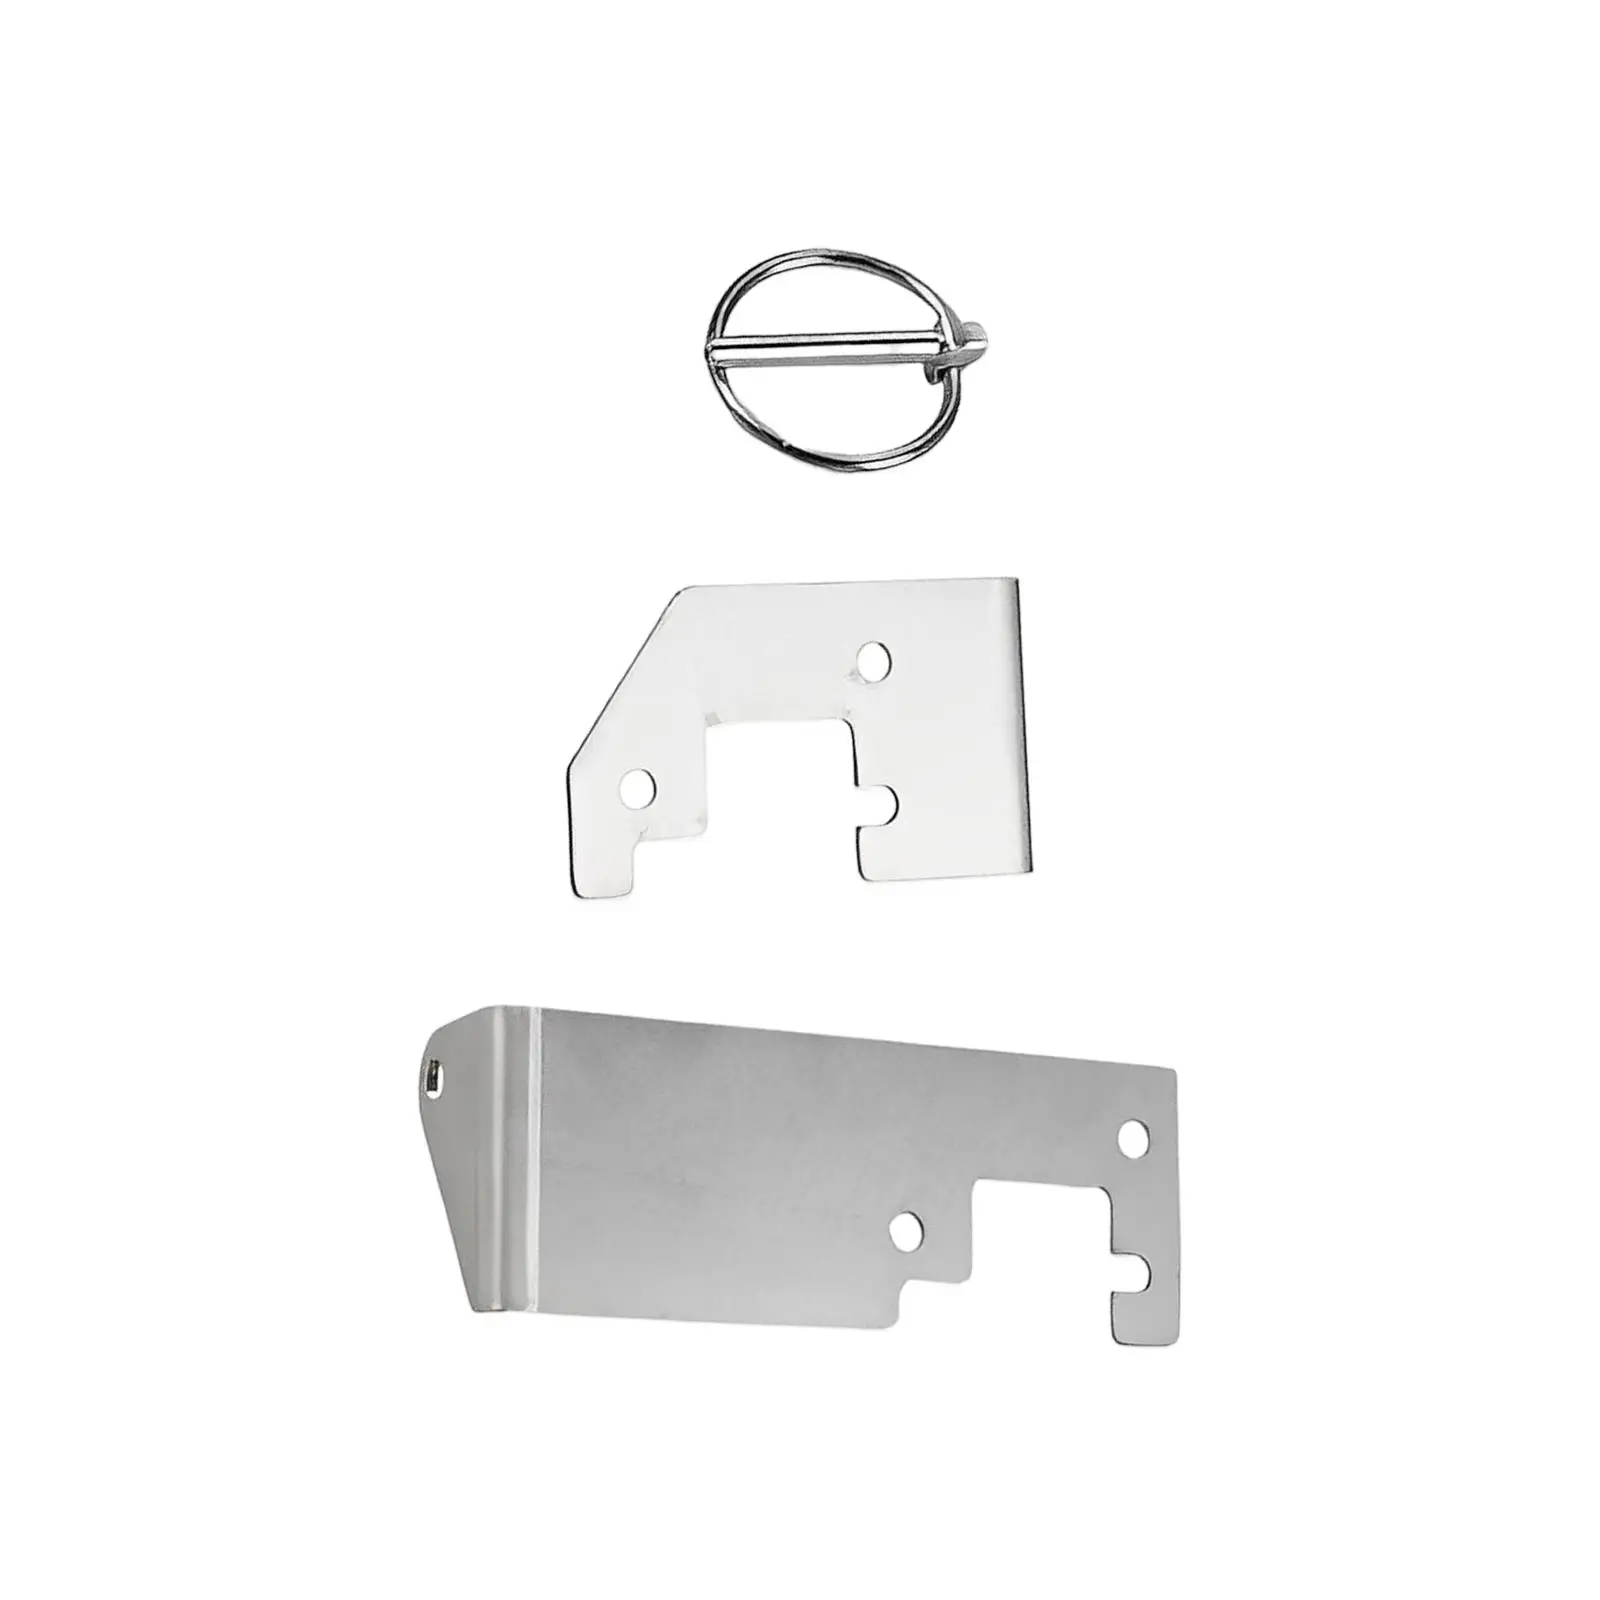 H1 H2 Roof Protection Metal Rear Door Lock for Fiat Ducato Boxer Relay